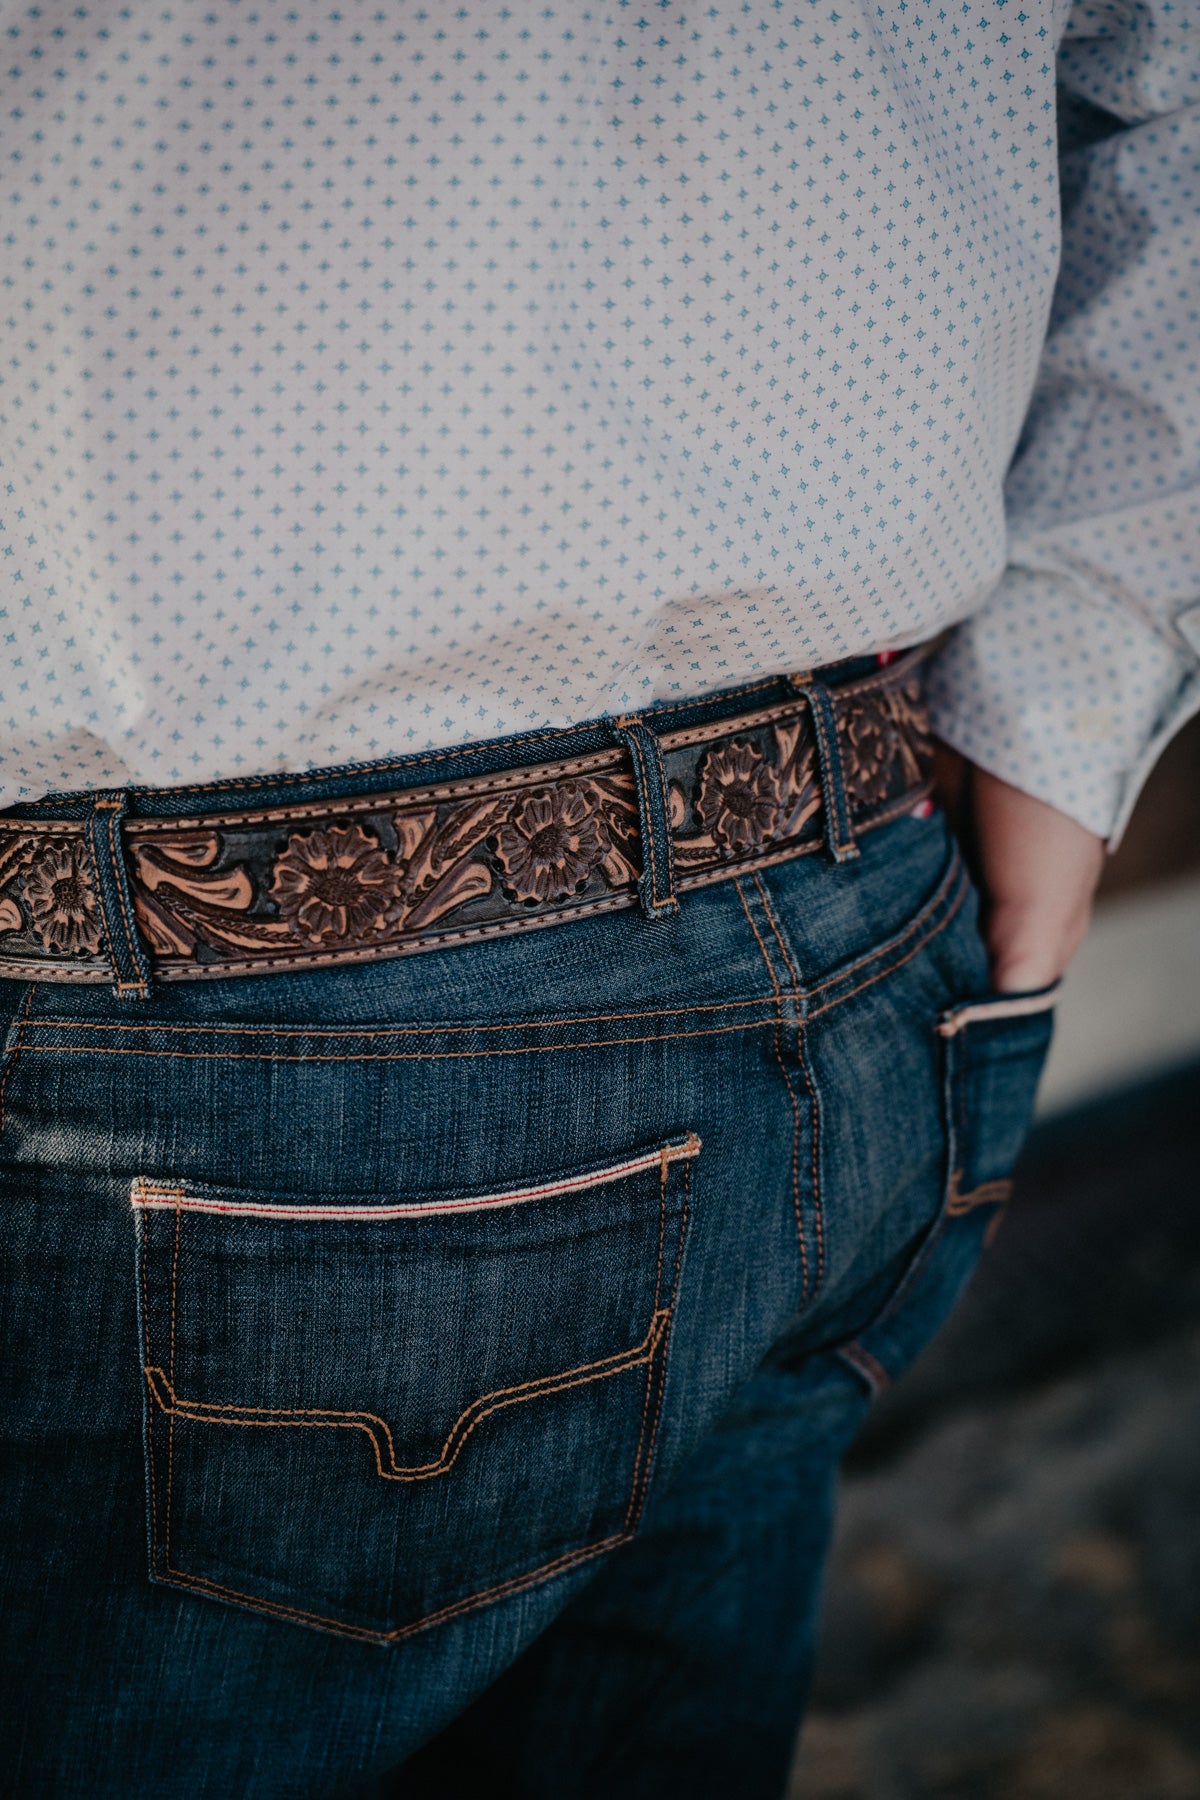 Large Floral Tooled Vintage Brown Belt by Double J Saddlery (1 7/8" tapered to 1 1/2")